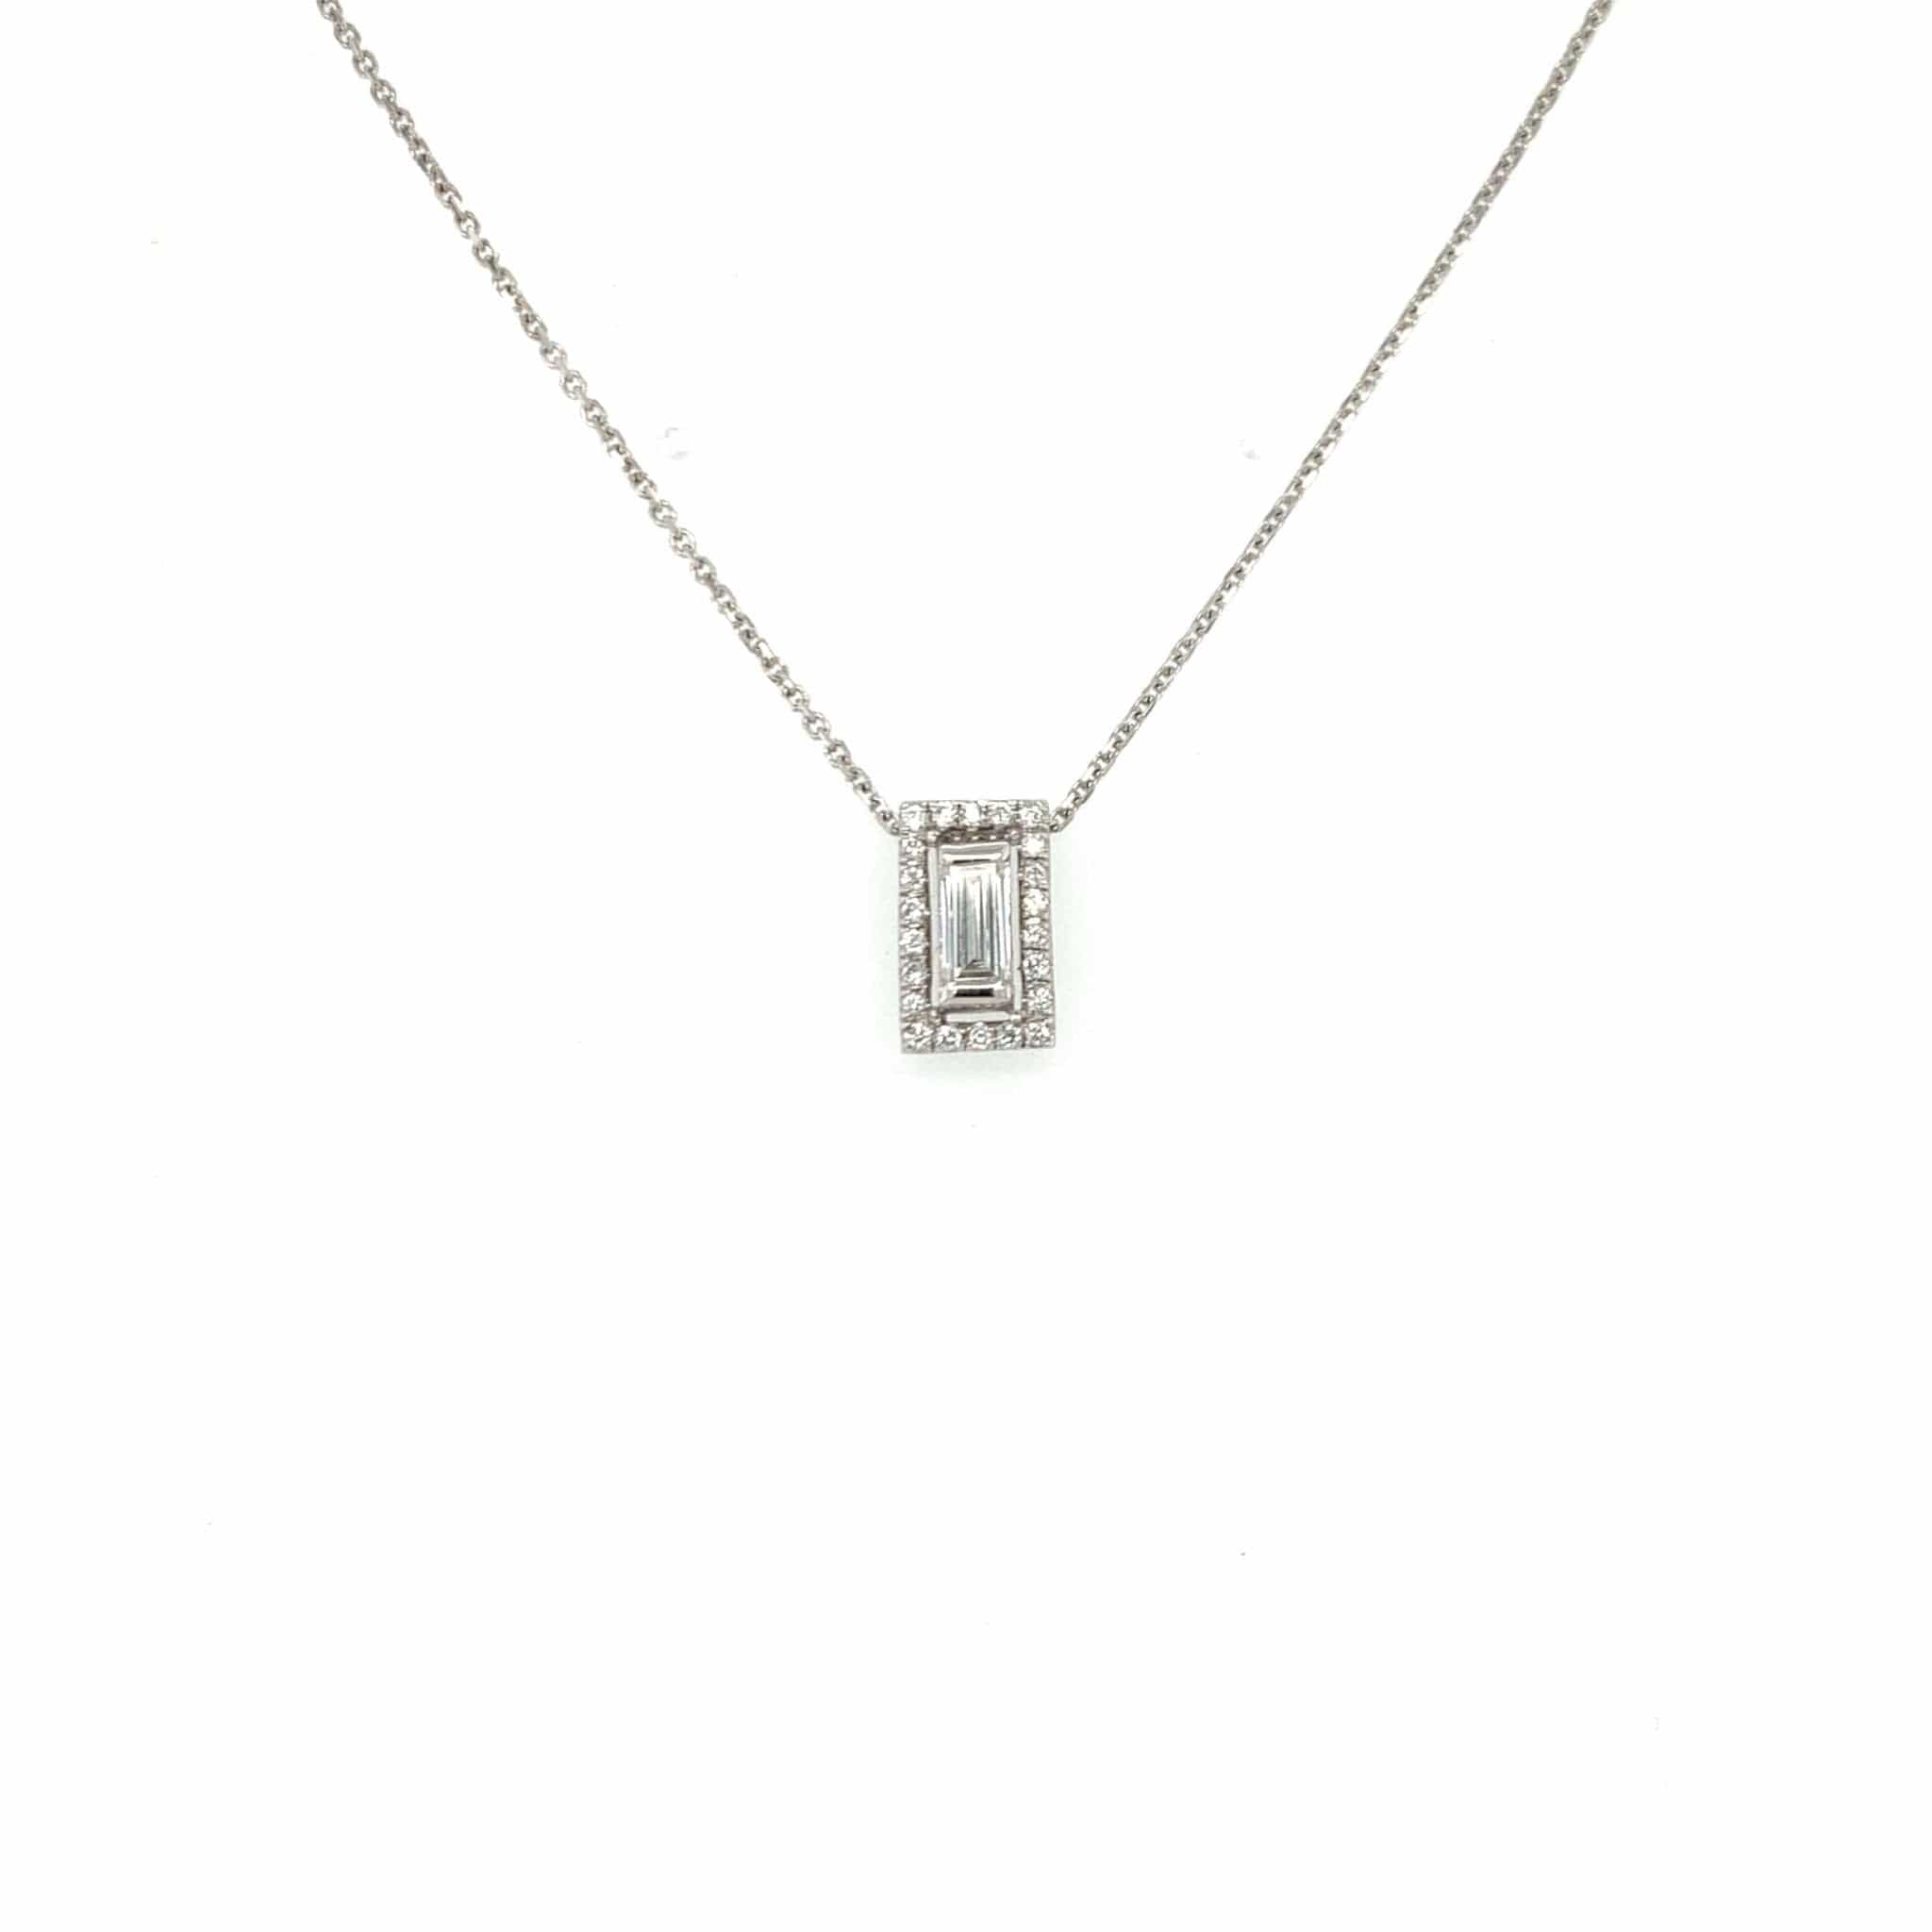 M.Fitaihi Everyday Sparkle - White Gold with Diamonds & Baguette Necklace - M.Fitaihi